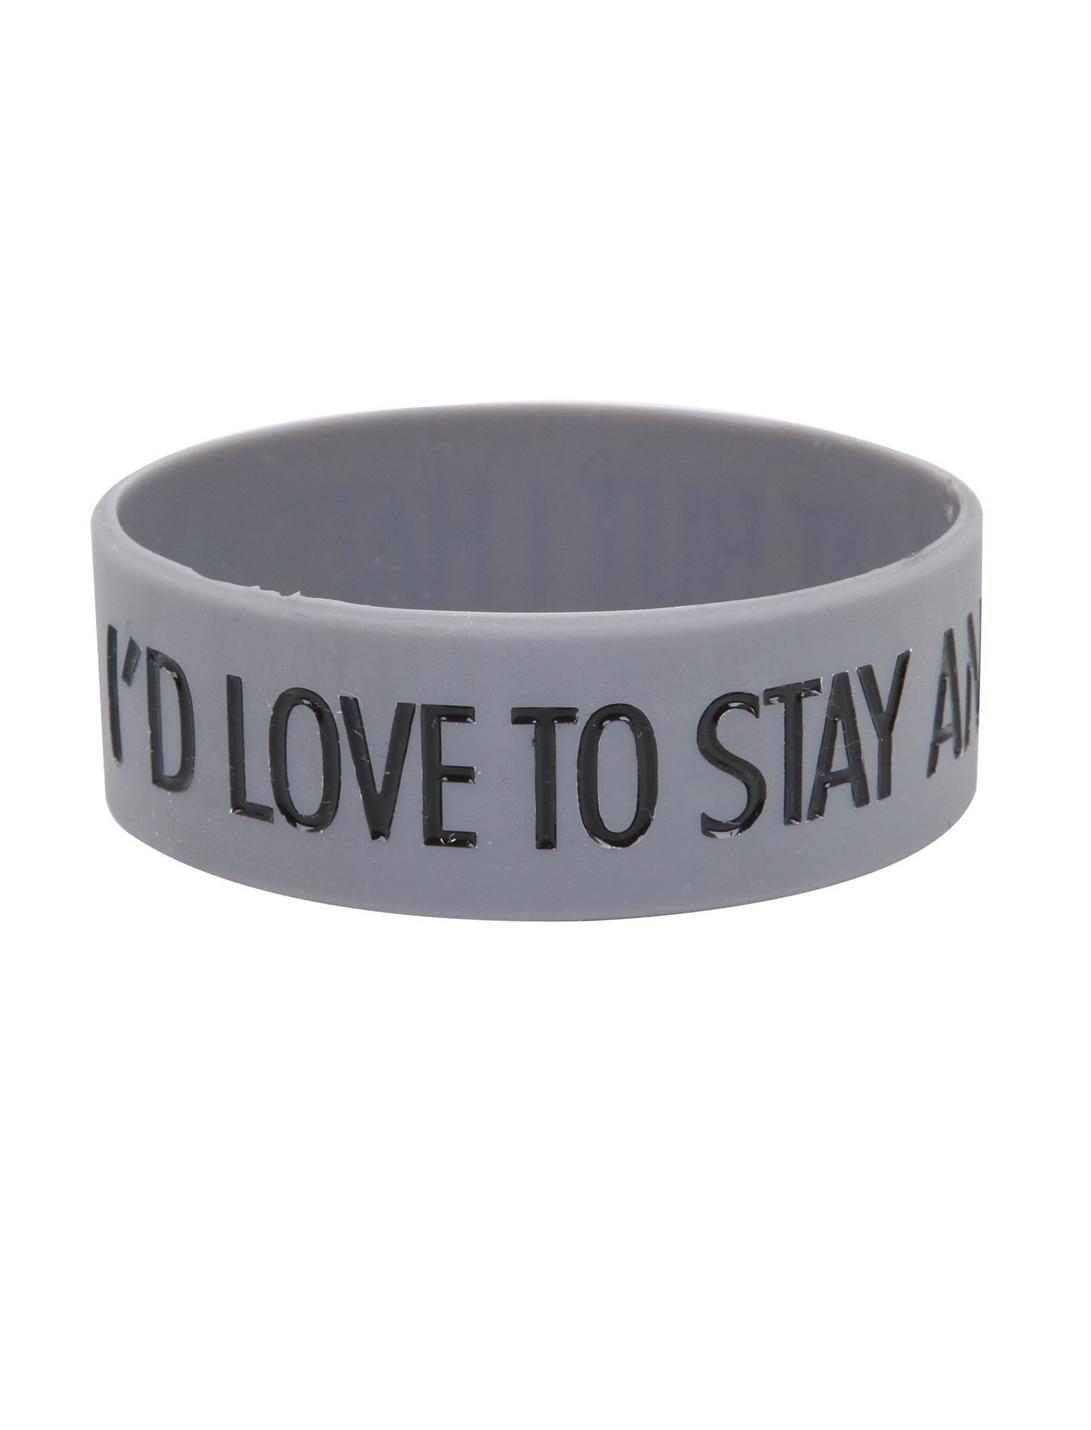 I’d Love To Stay & Chat But… Rubber Bracelet, , hi-res